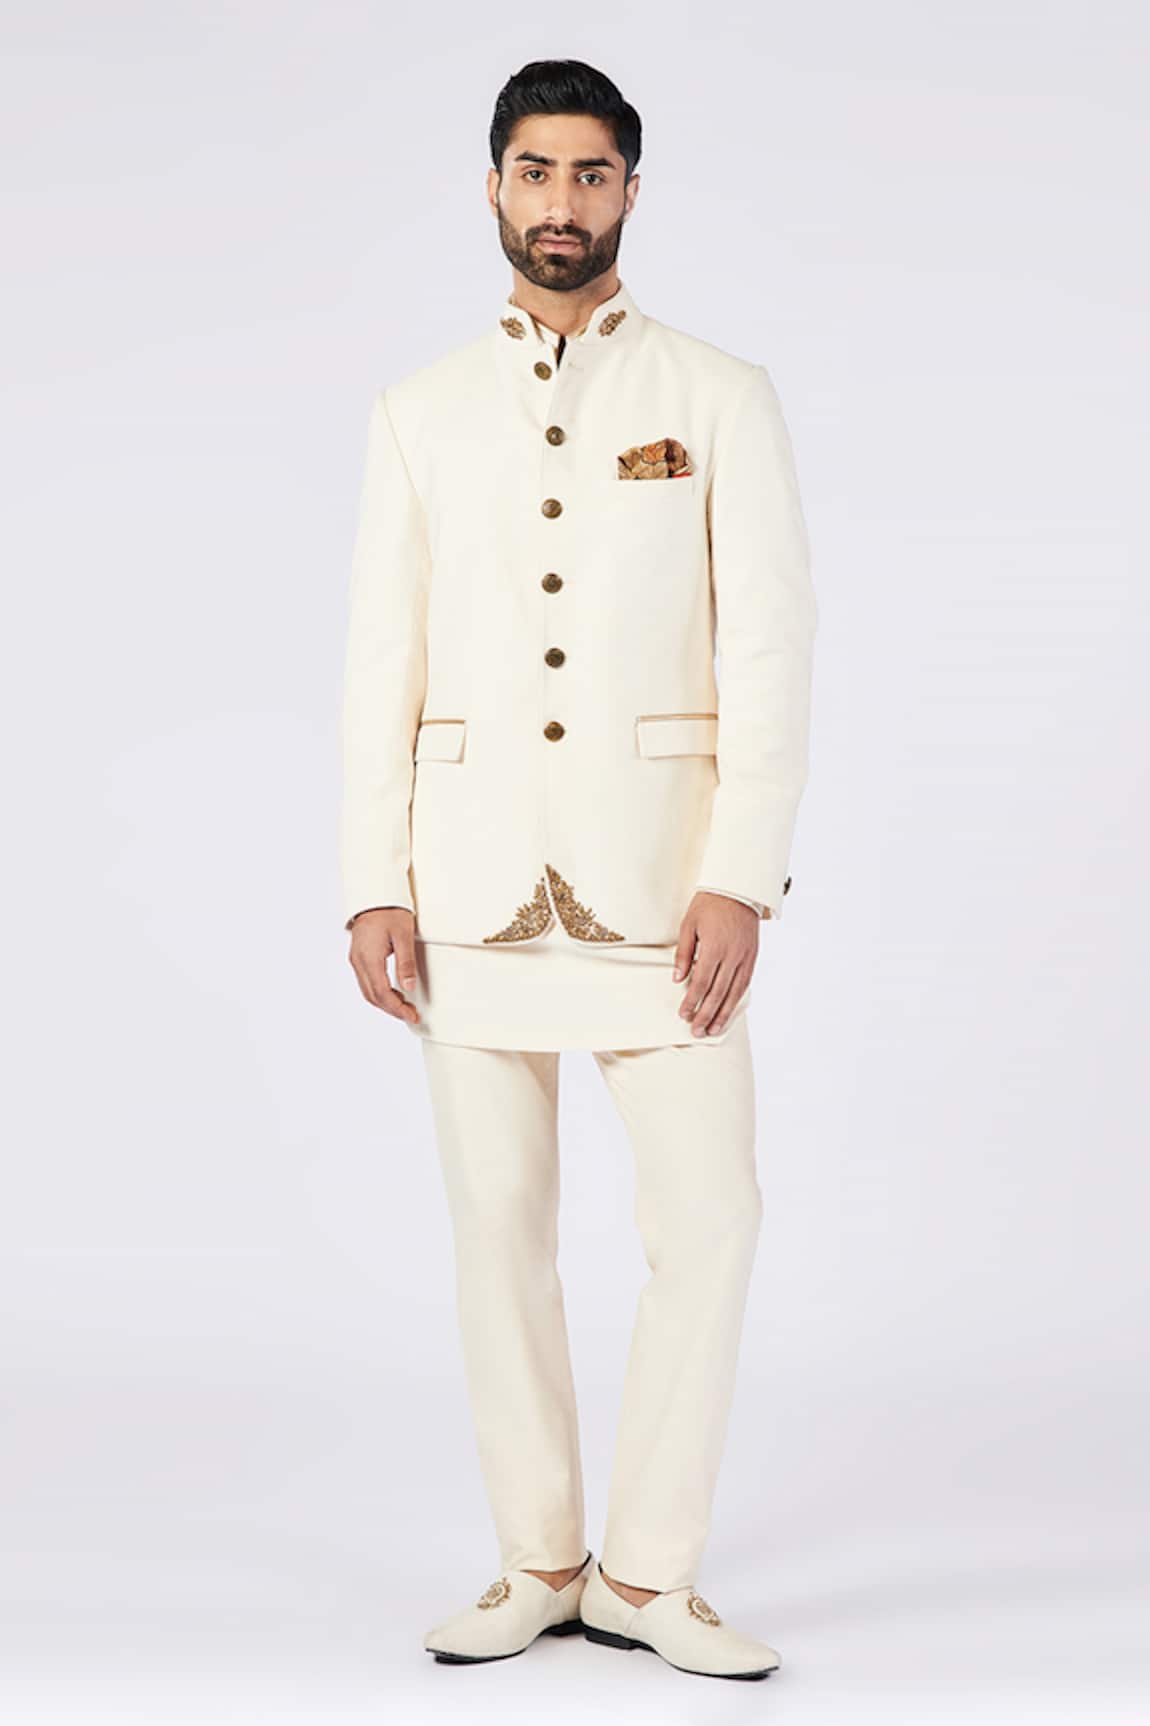 S&N by Shantnu Nikhil Patchwork Embroidered Collar Bandhgala